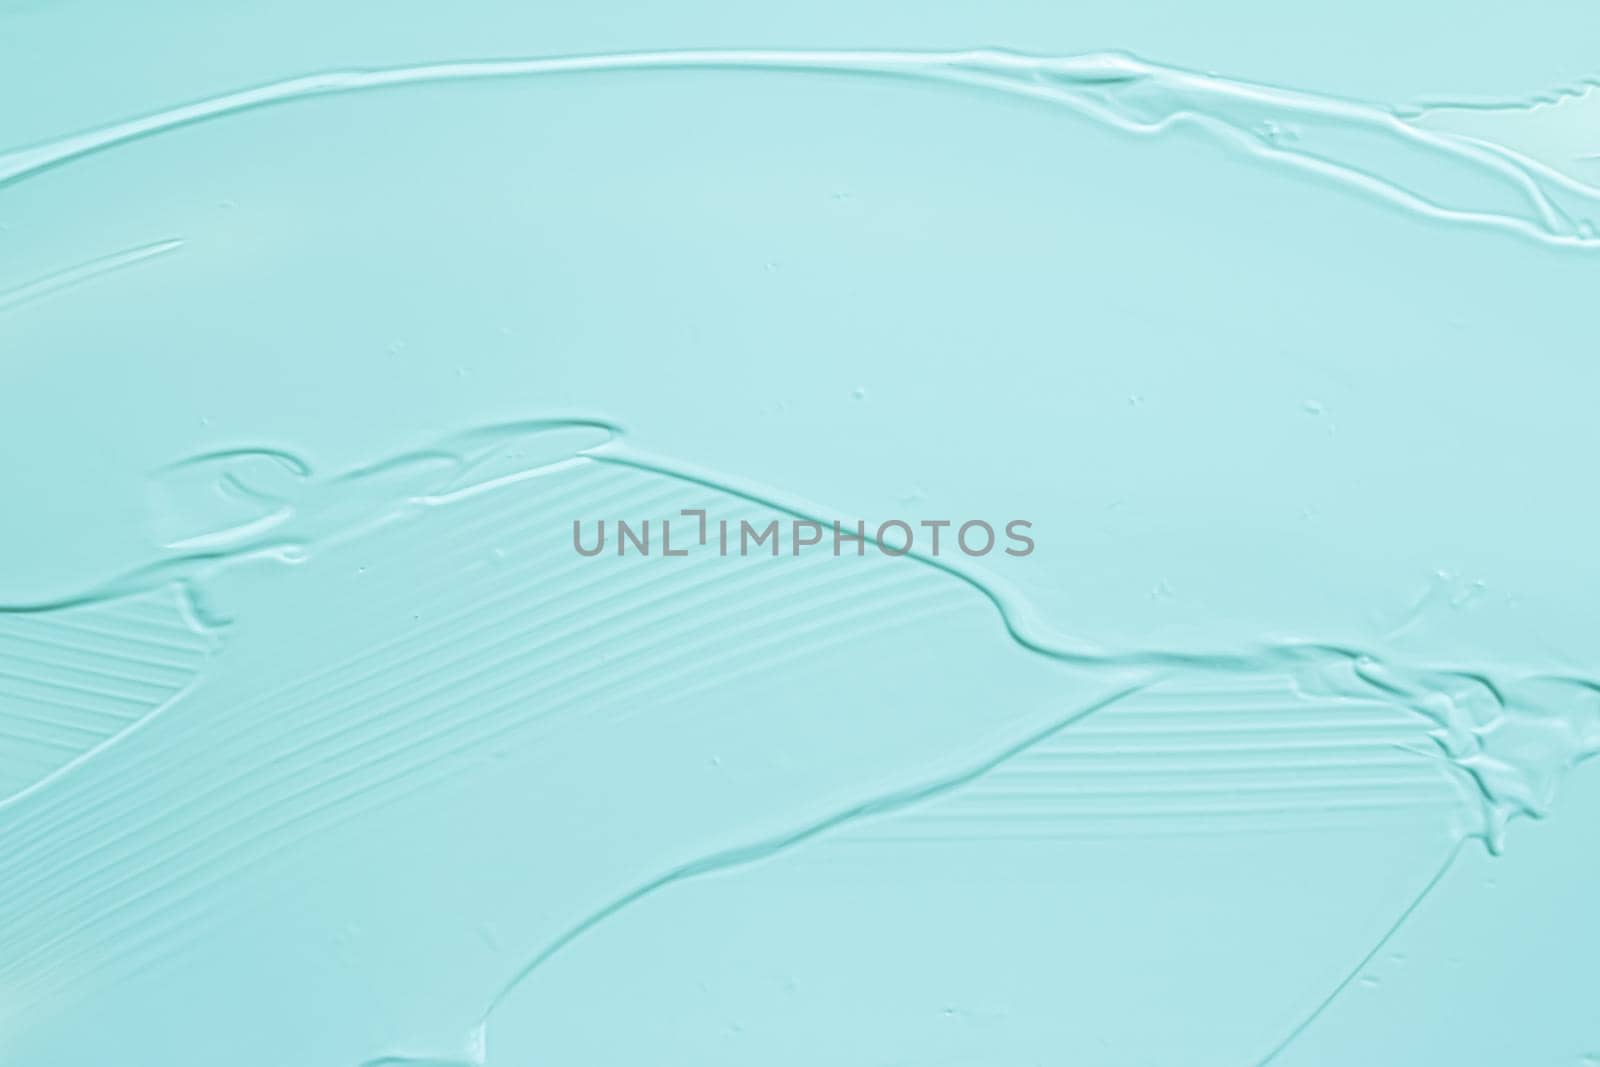 Mint cosmetic texture background, make-up and skincare cosmetics cream product, luxury beauty brand, holiday flatlay design or abstract wall art and paint strokes.